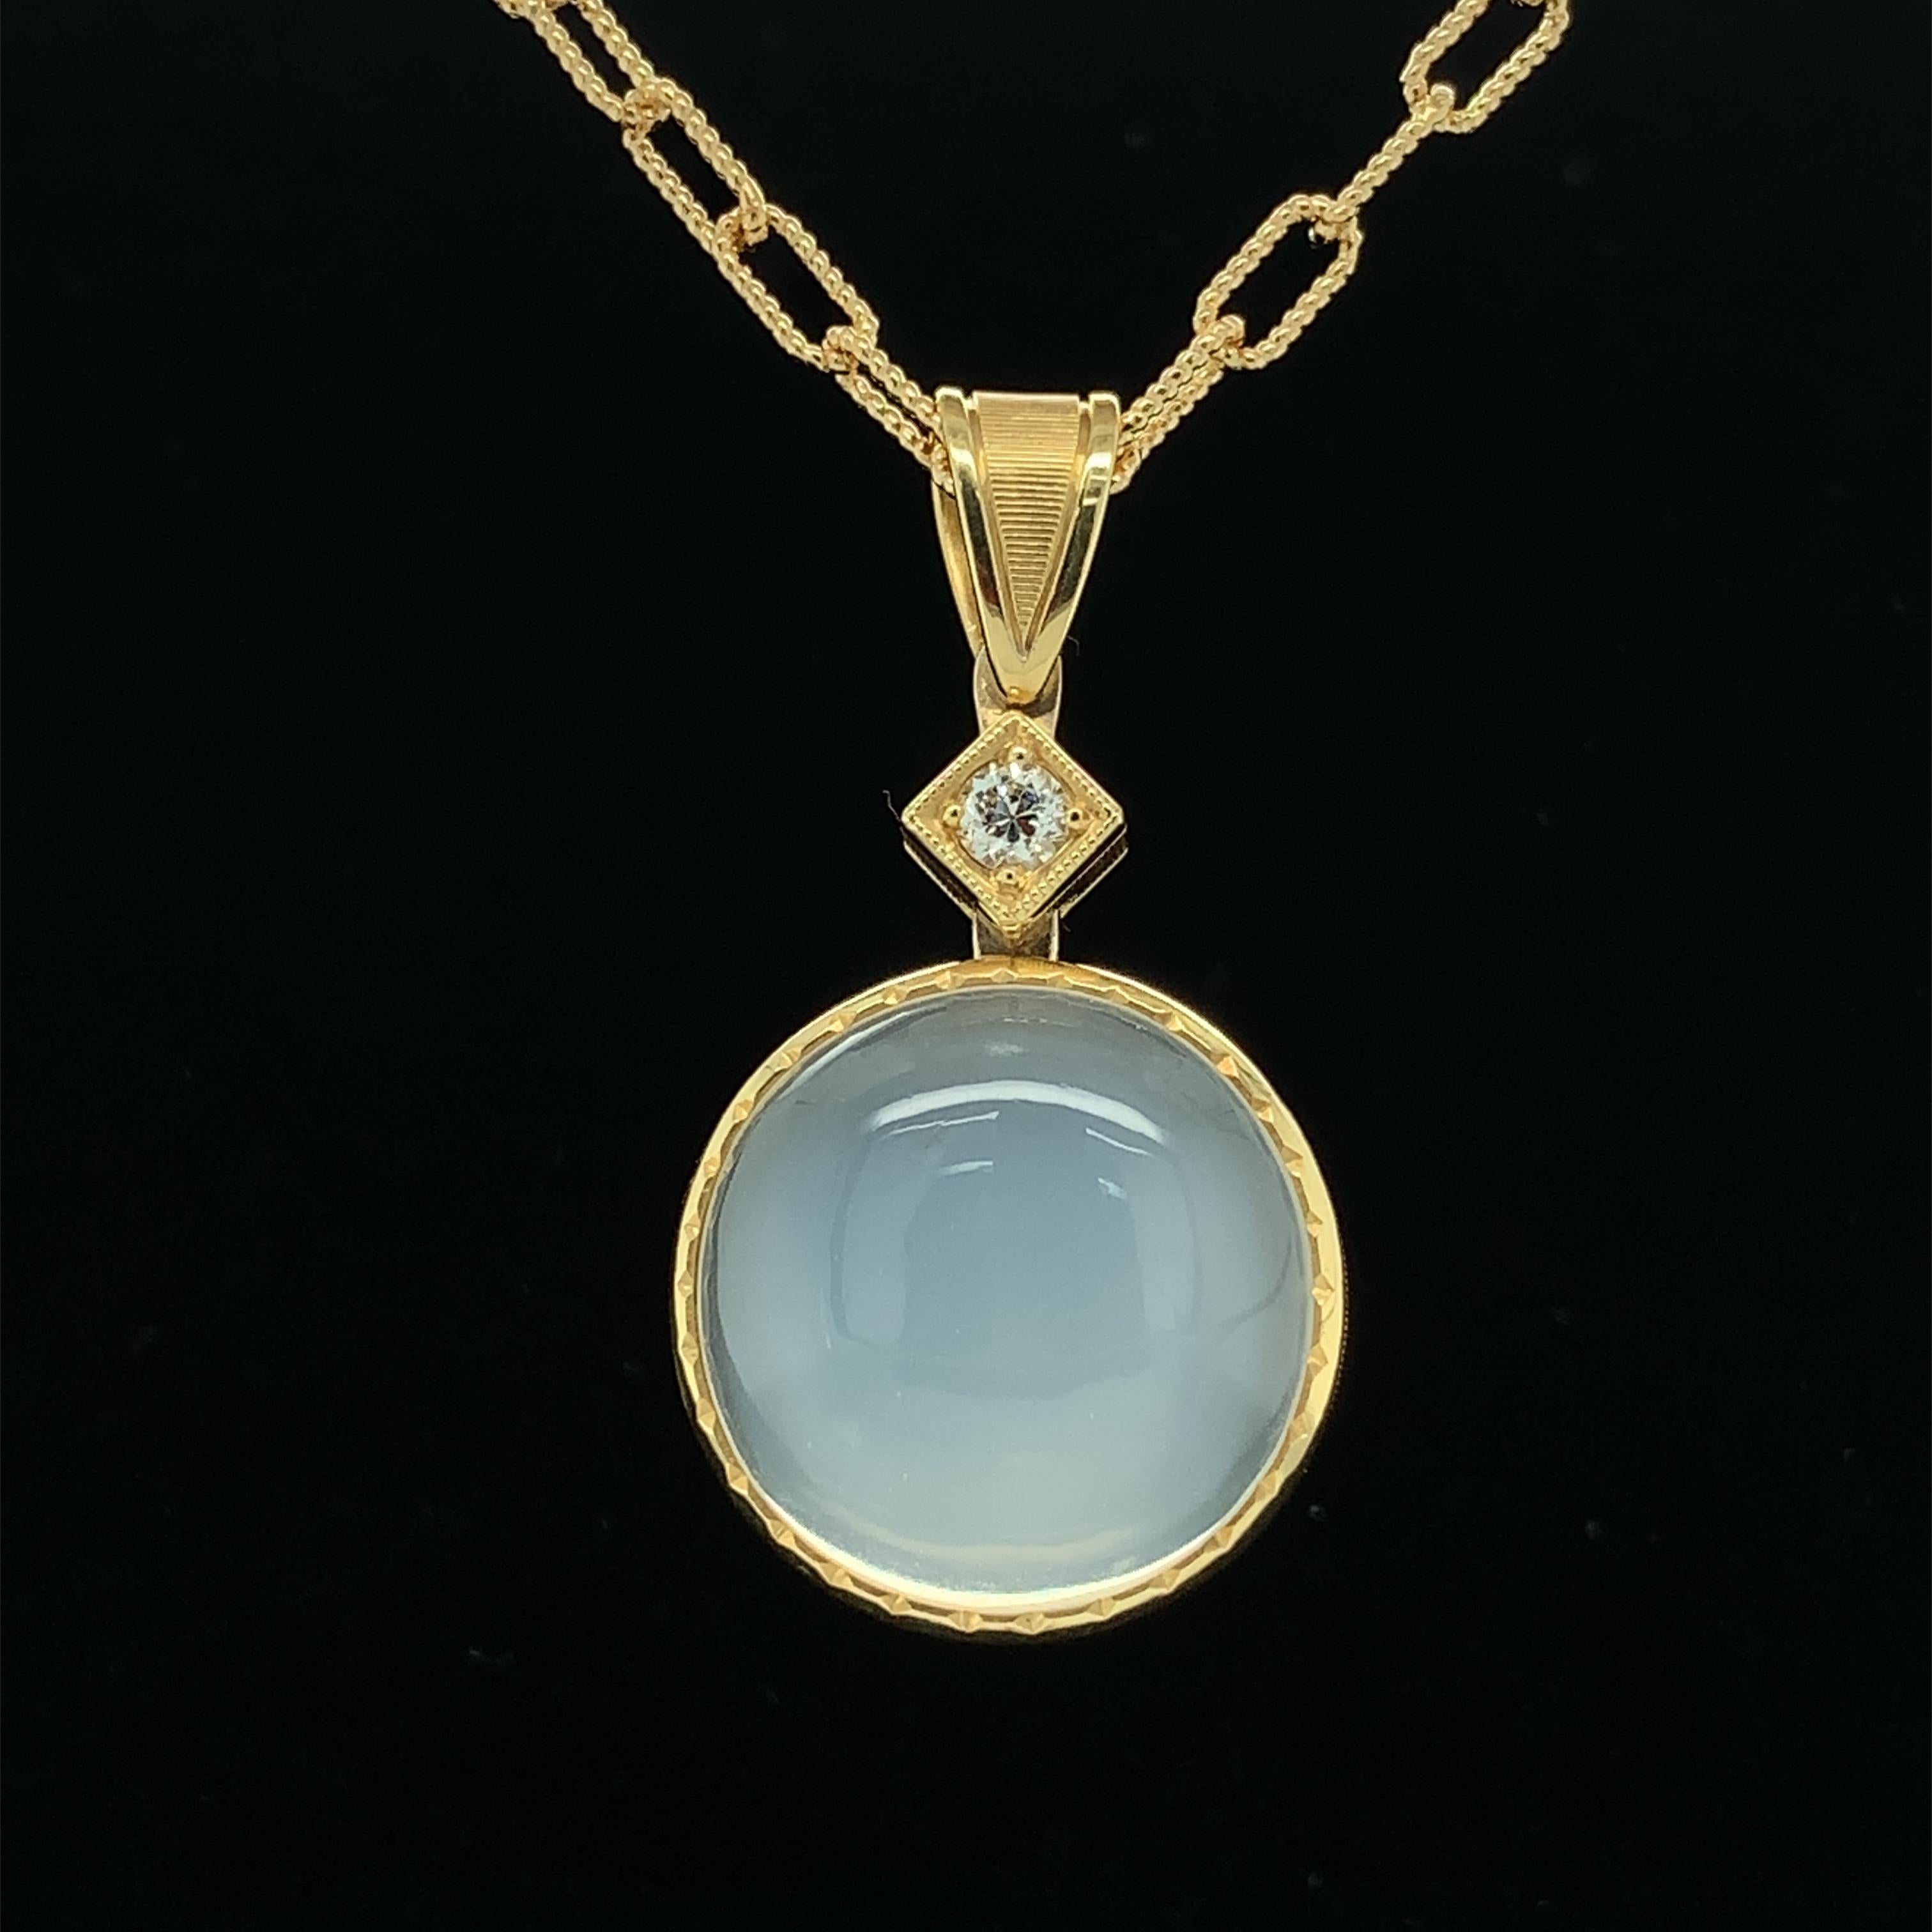 Artisan 16.95 ct. Round Moonstone, Diamond, Yellow Gold Pendant Necklace with Chain